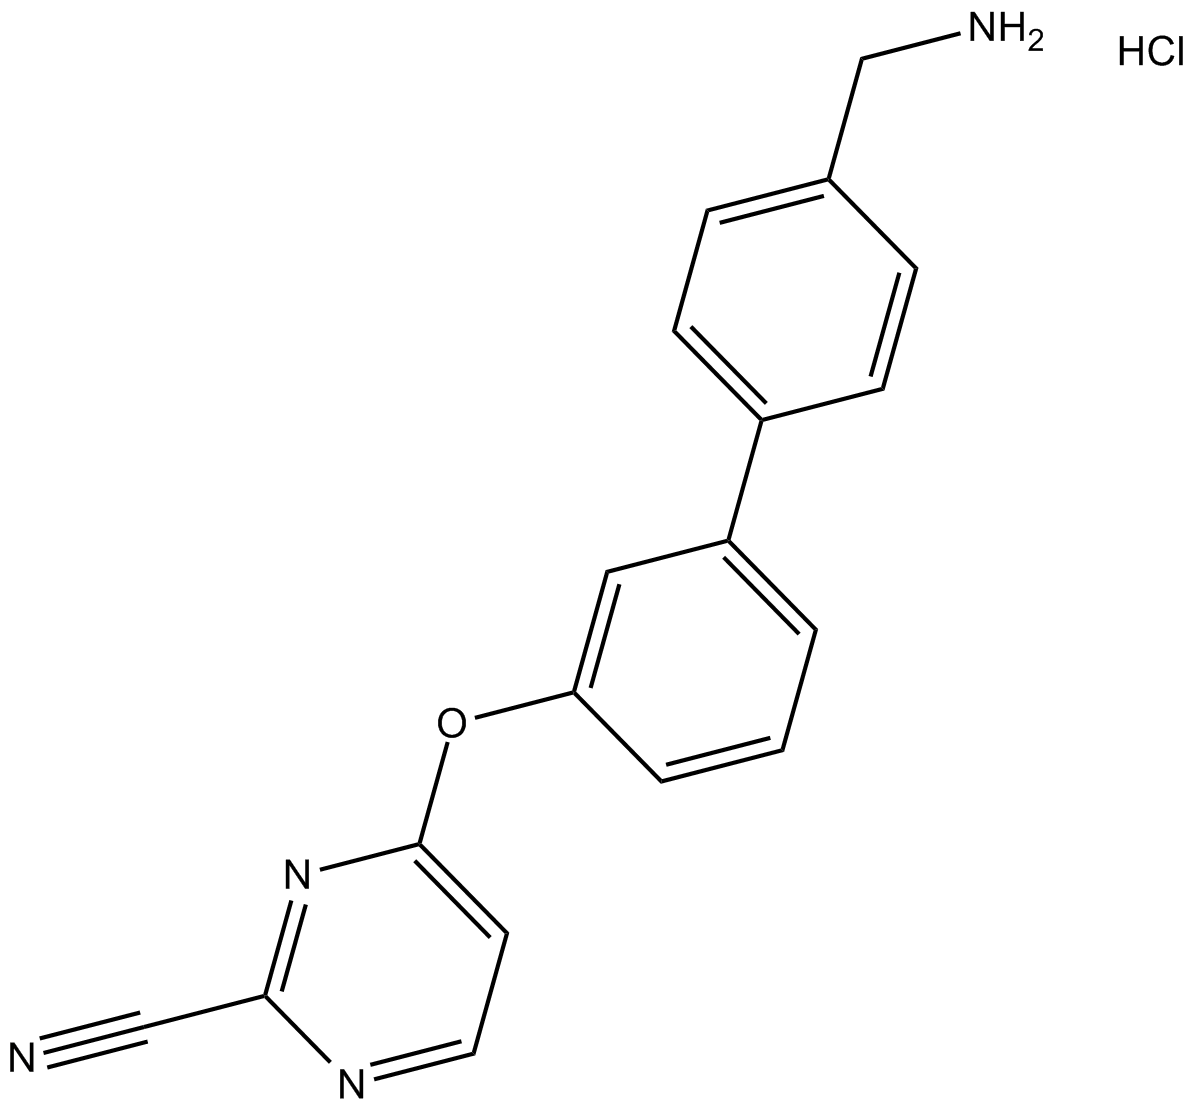 Cysteine Protease inhibitor hydrochloride  Chemical Structure